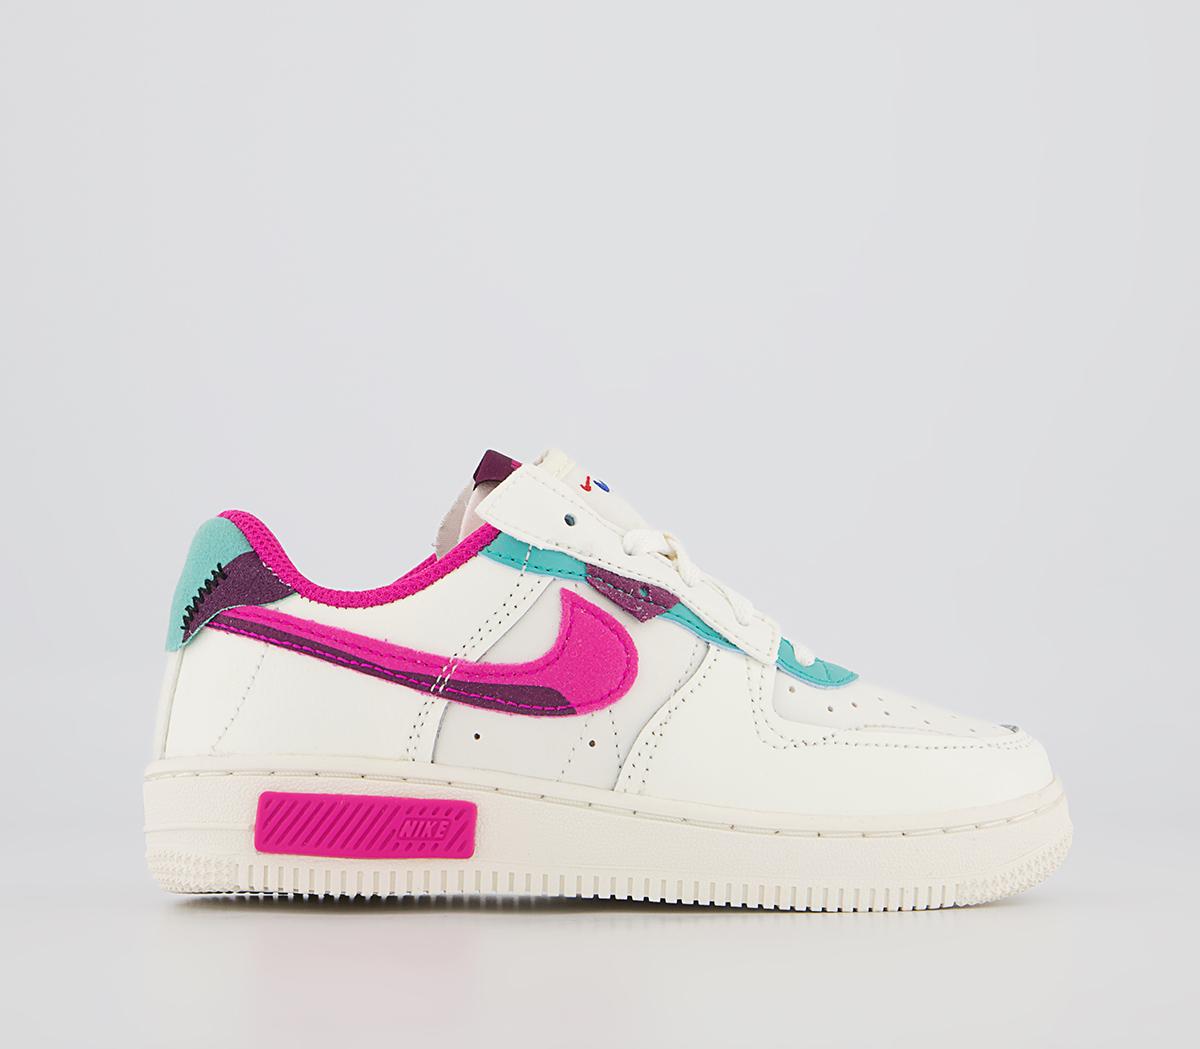 NikeAir Force 1 Fontanka Ps TrainersSail Pink Prime Washed Teal Sangria